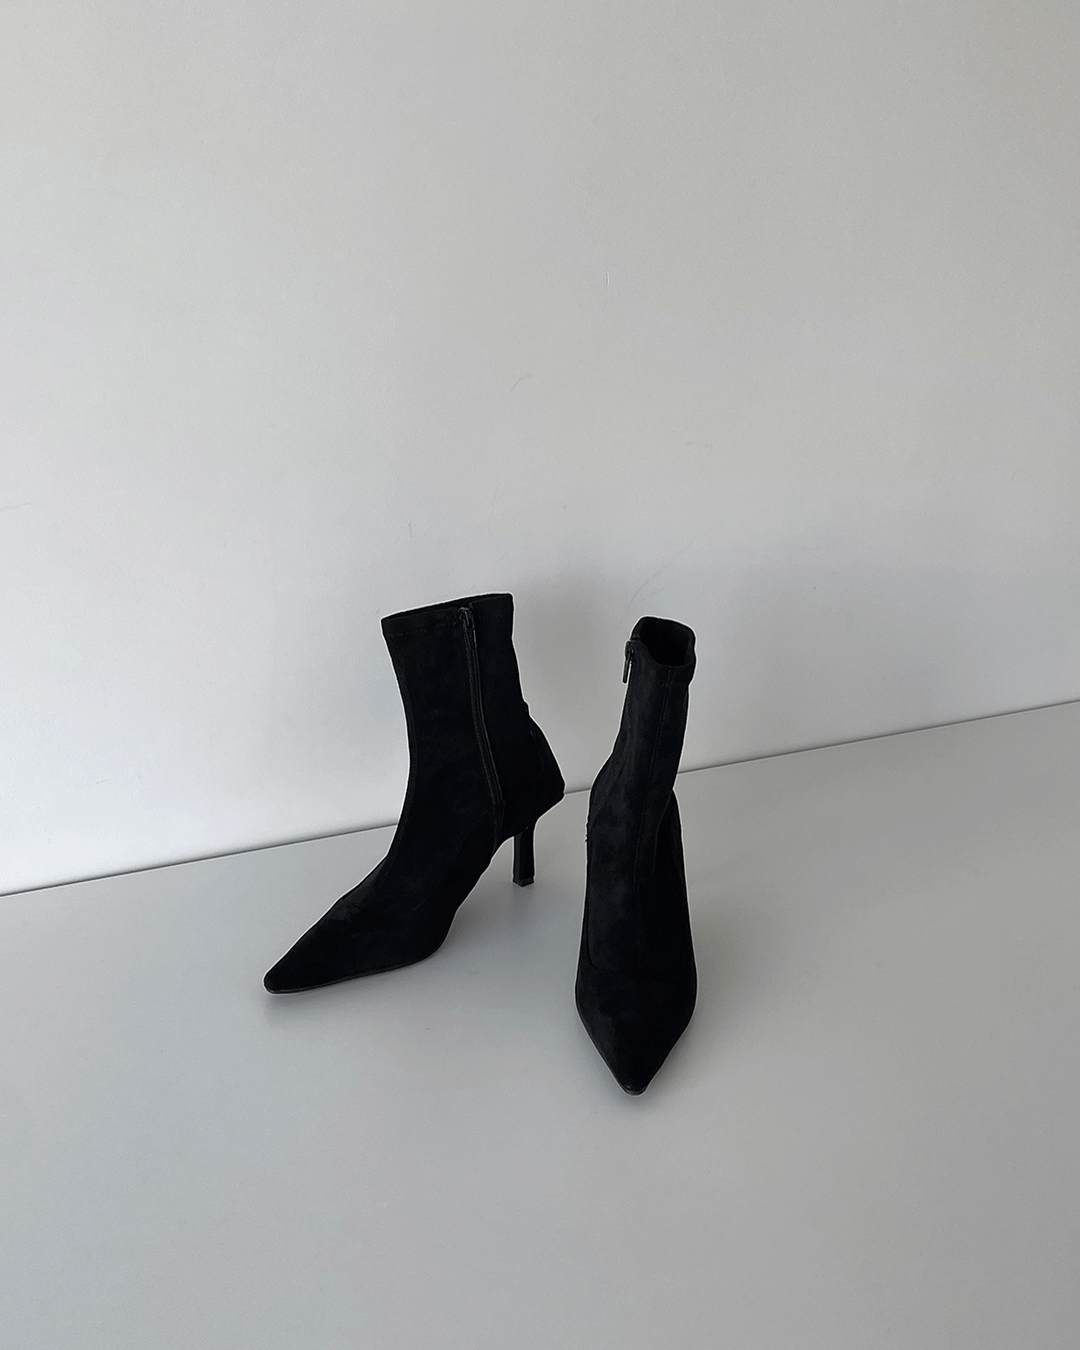 Euro boots